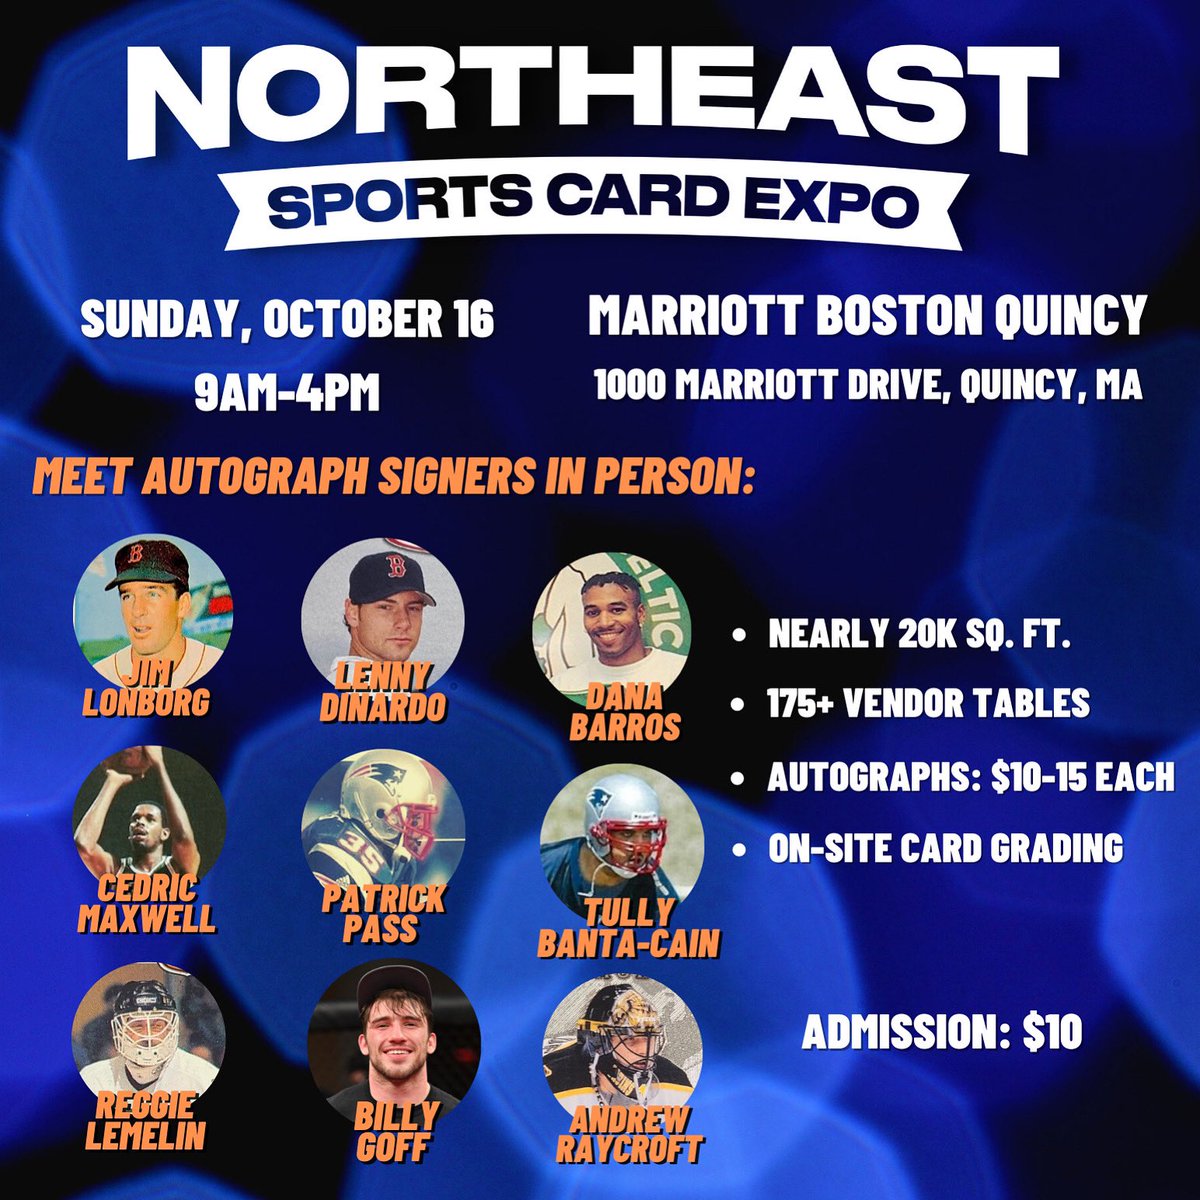 Get your tickets at the door or online now!

northeastcardexpo.com/tickets 

#northeastsportscardexpo #cardshow #cardshows #tradingcards #pokemoncards #pokemon #thehobby #whodoyoucollect #paniniamerica #autographs